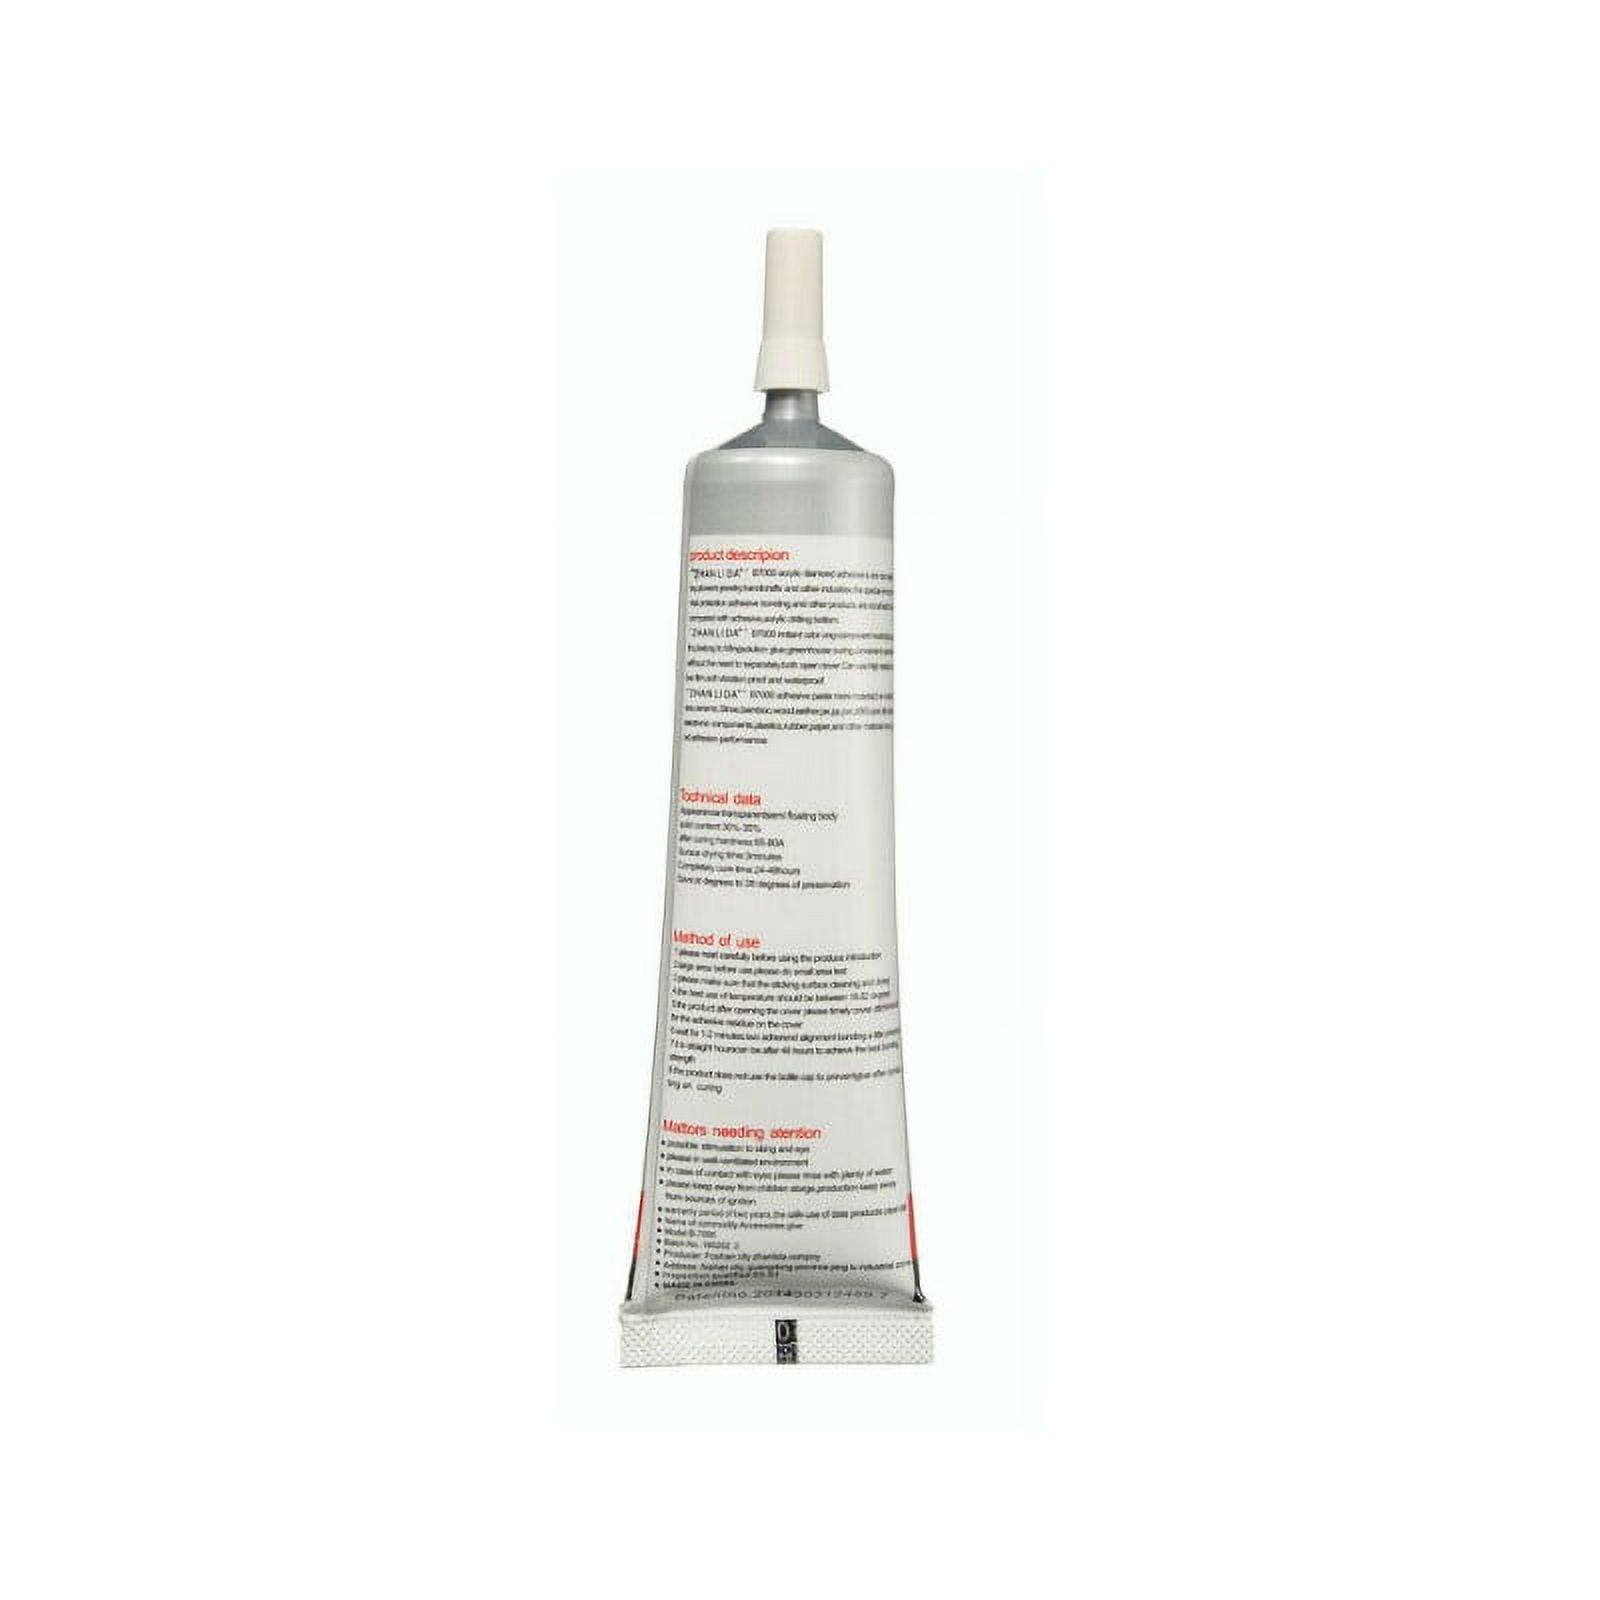 B-7000 15ml Multipurpose High Performance Industrial Glue Transparent Contact Adhesives Precision Tips for Clean Working (25ml )